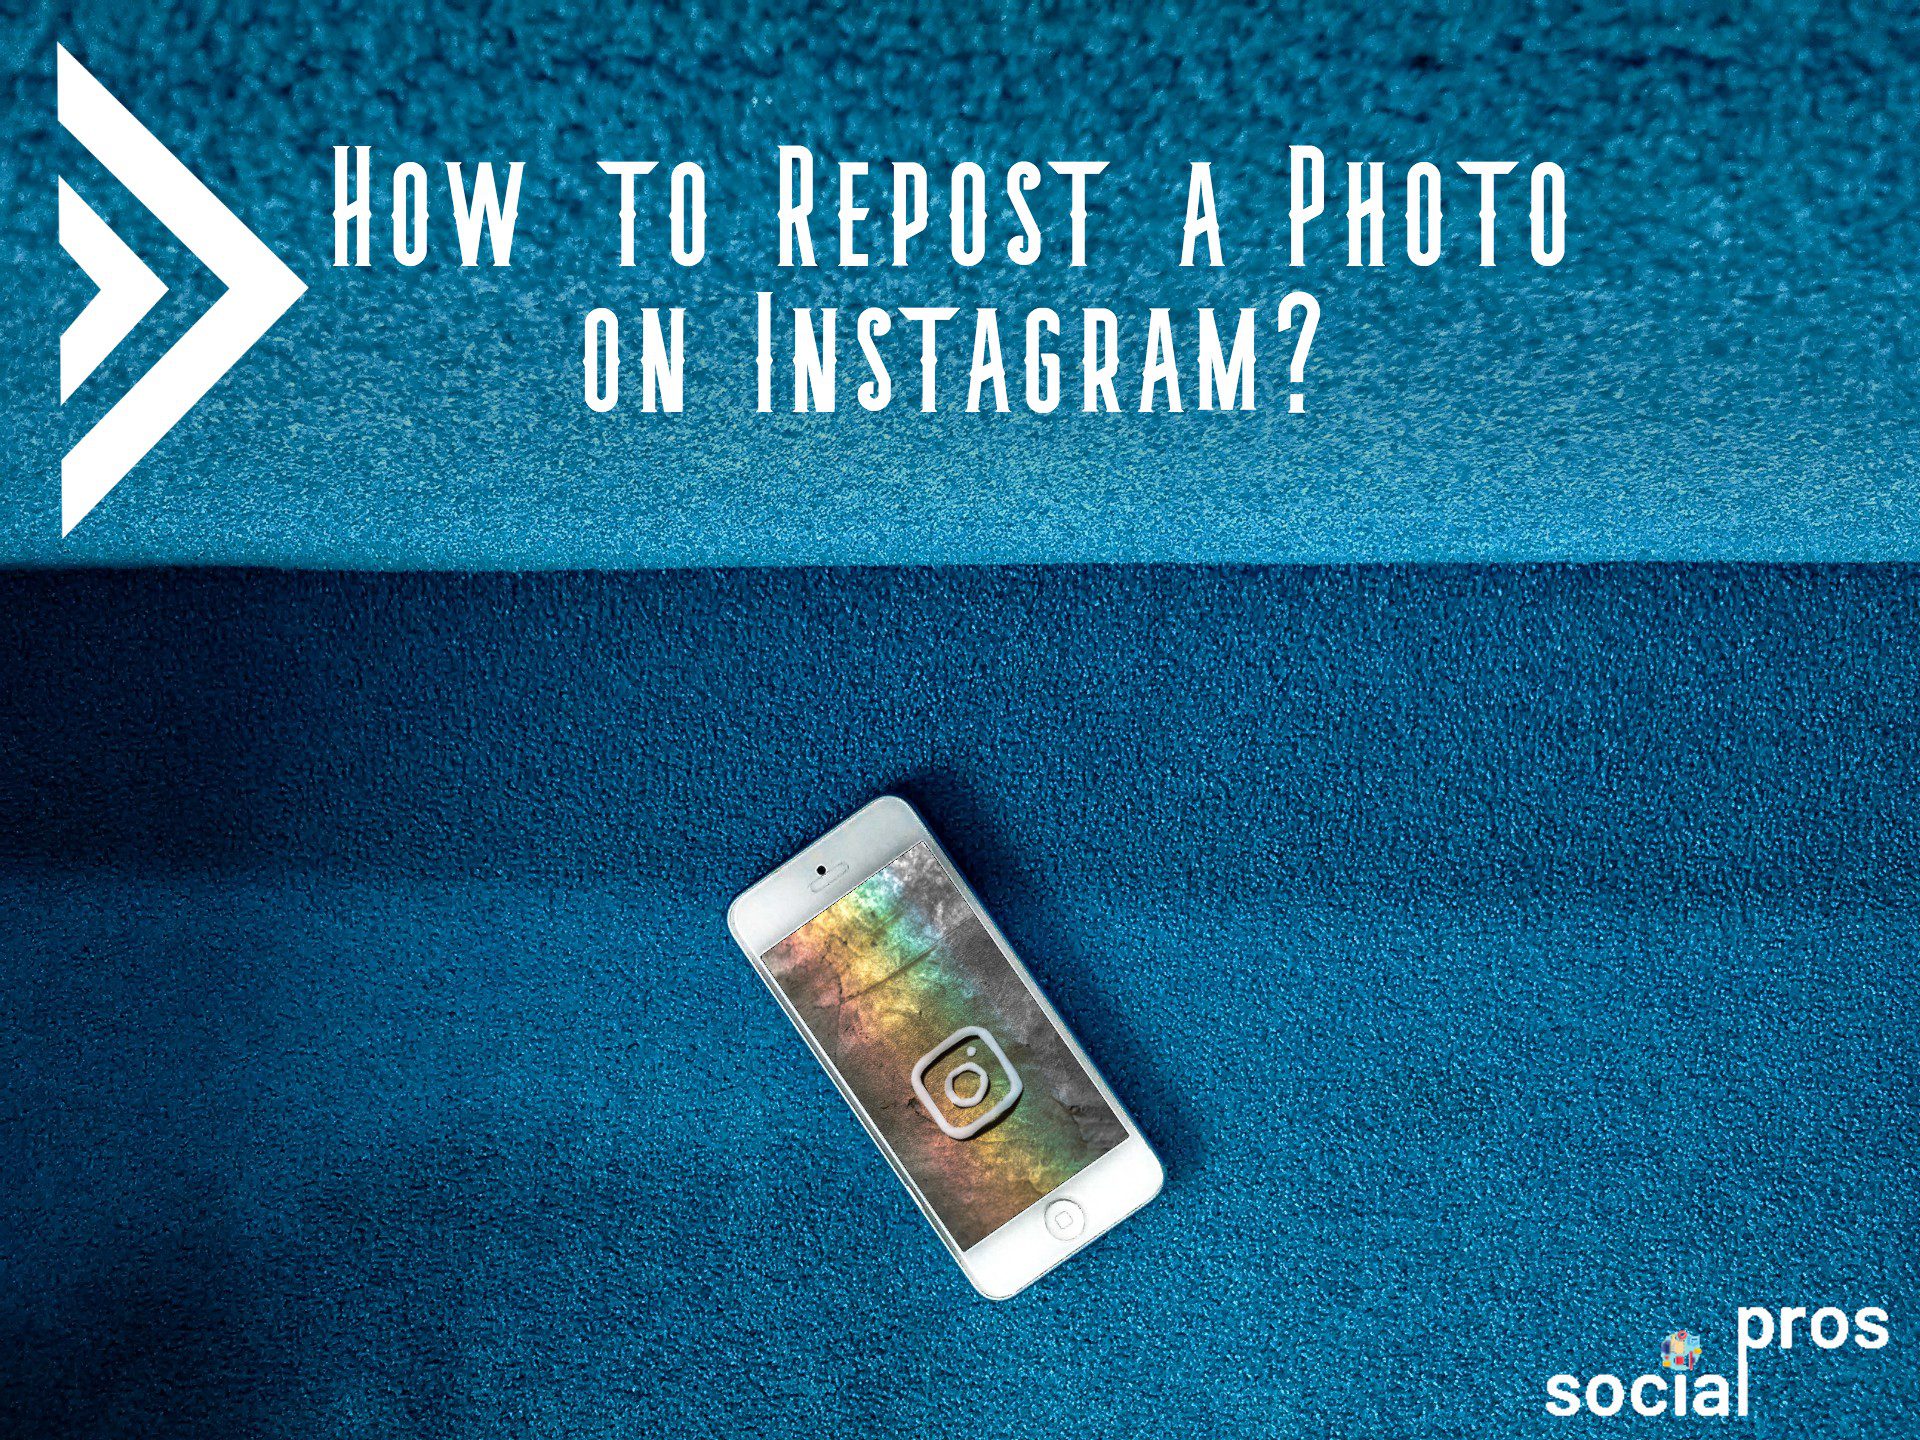 How to Repost a Photo on Instagram